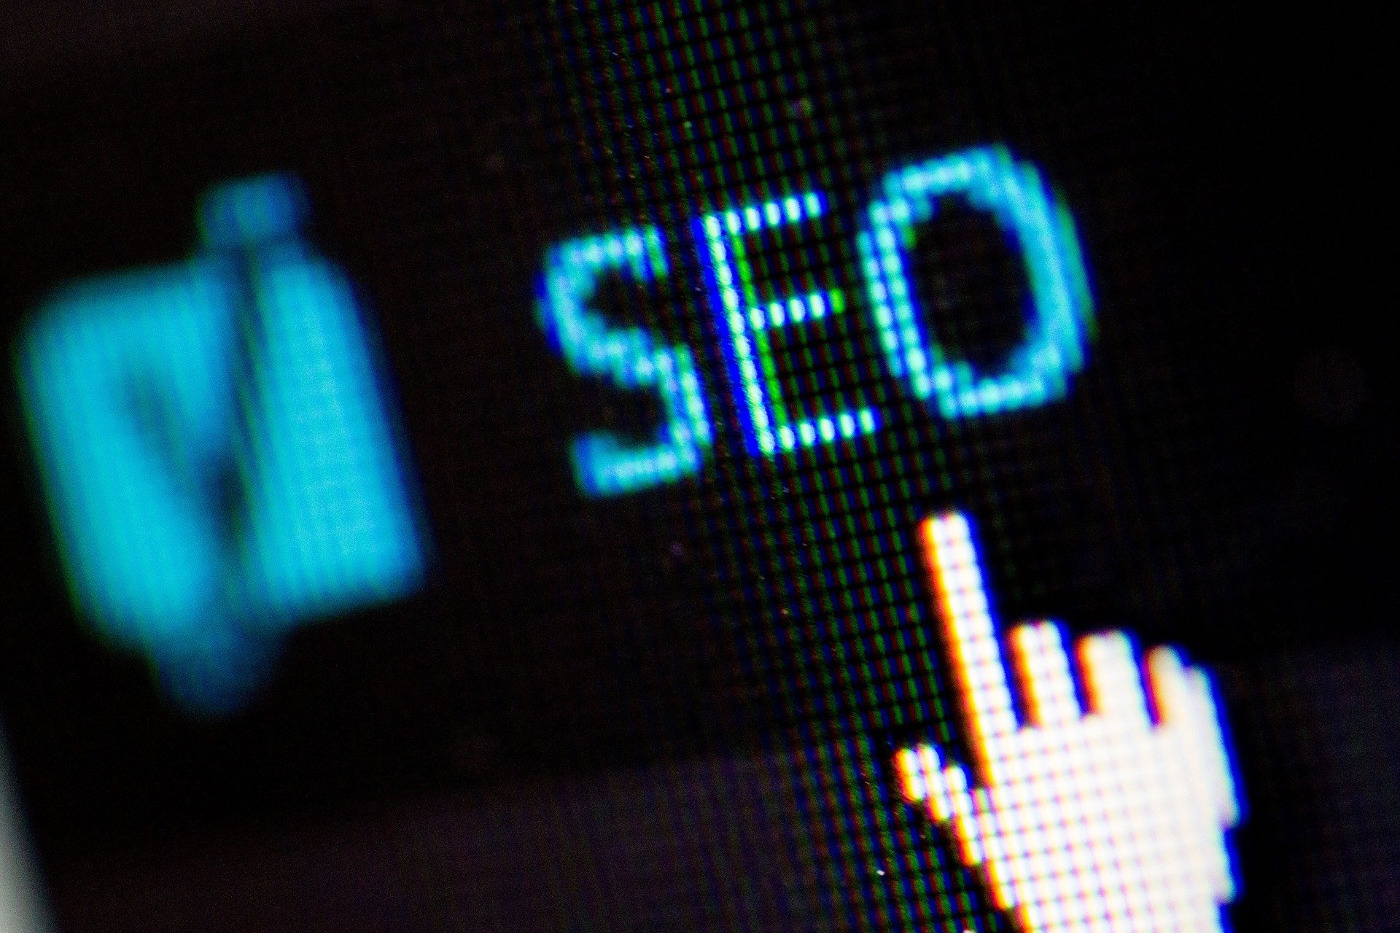 Mouse hand icon hovering over words "SEO"